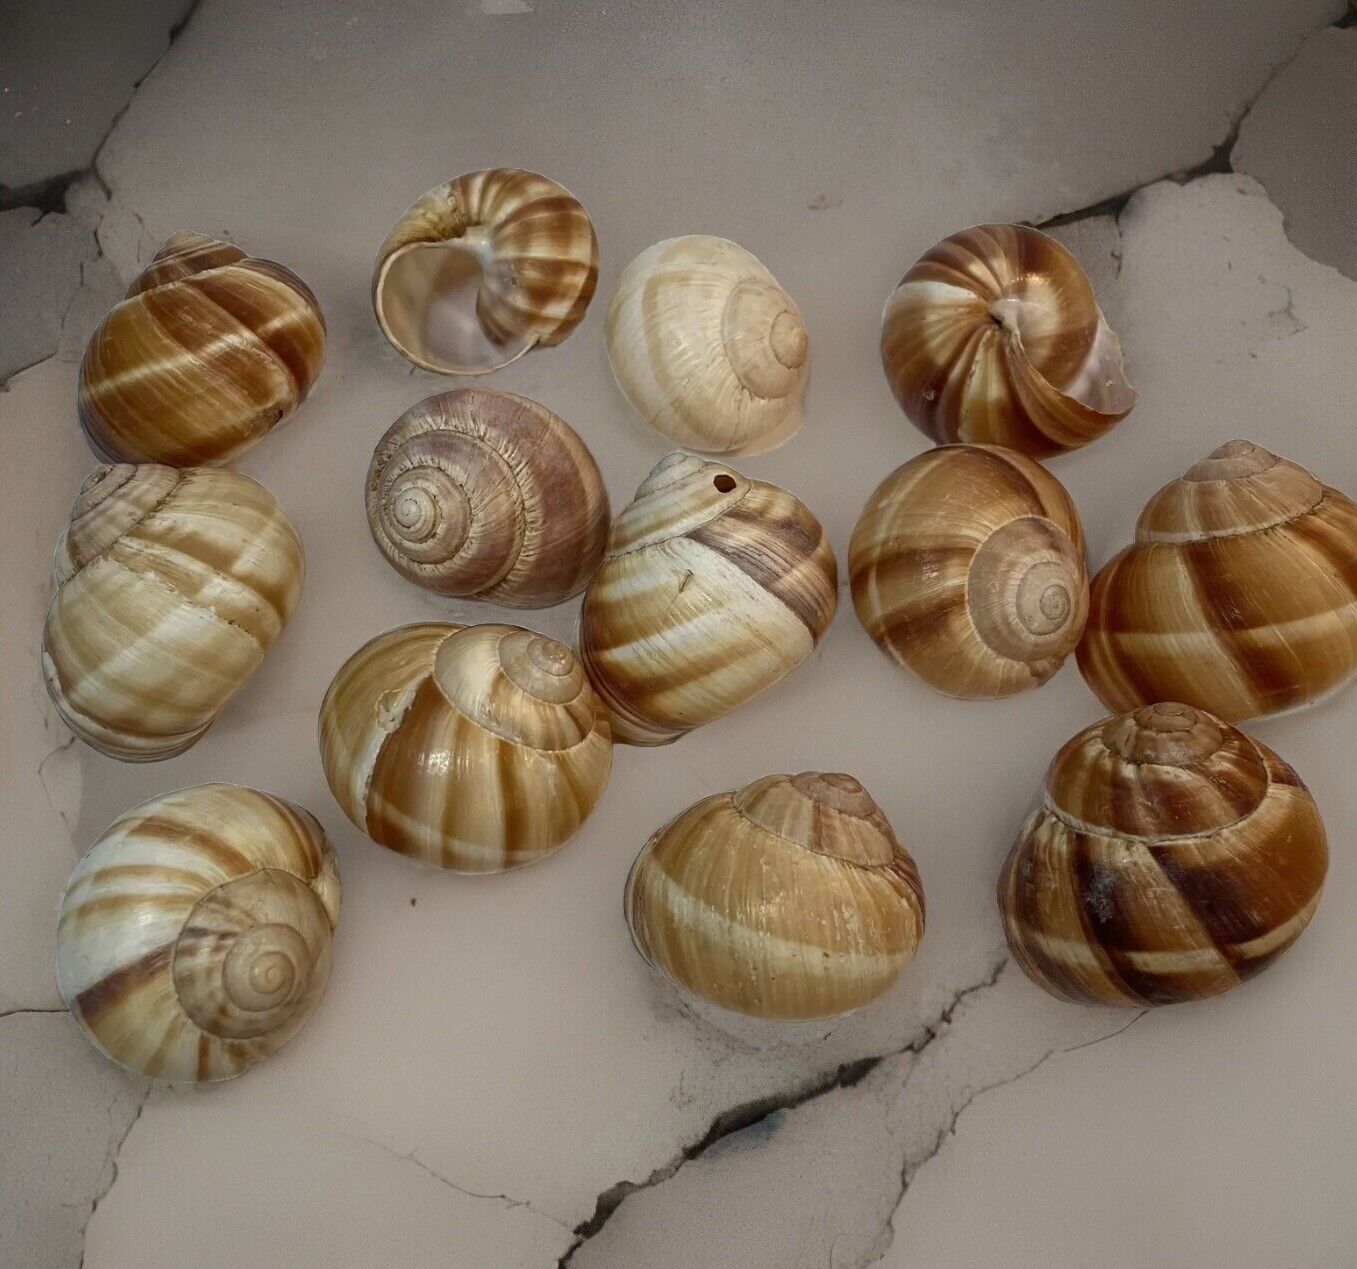 Lot of 13 LARGE Natural Florida 2” APPLE SNAIL SHELLS Clean Striped Natural